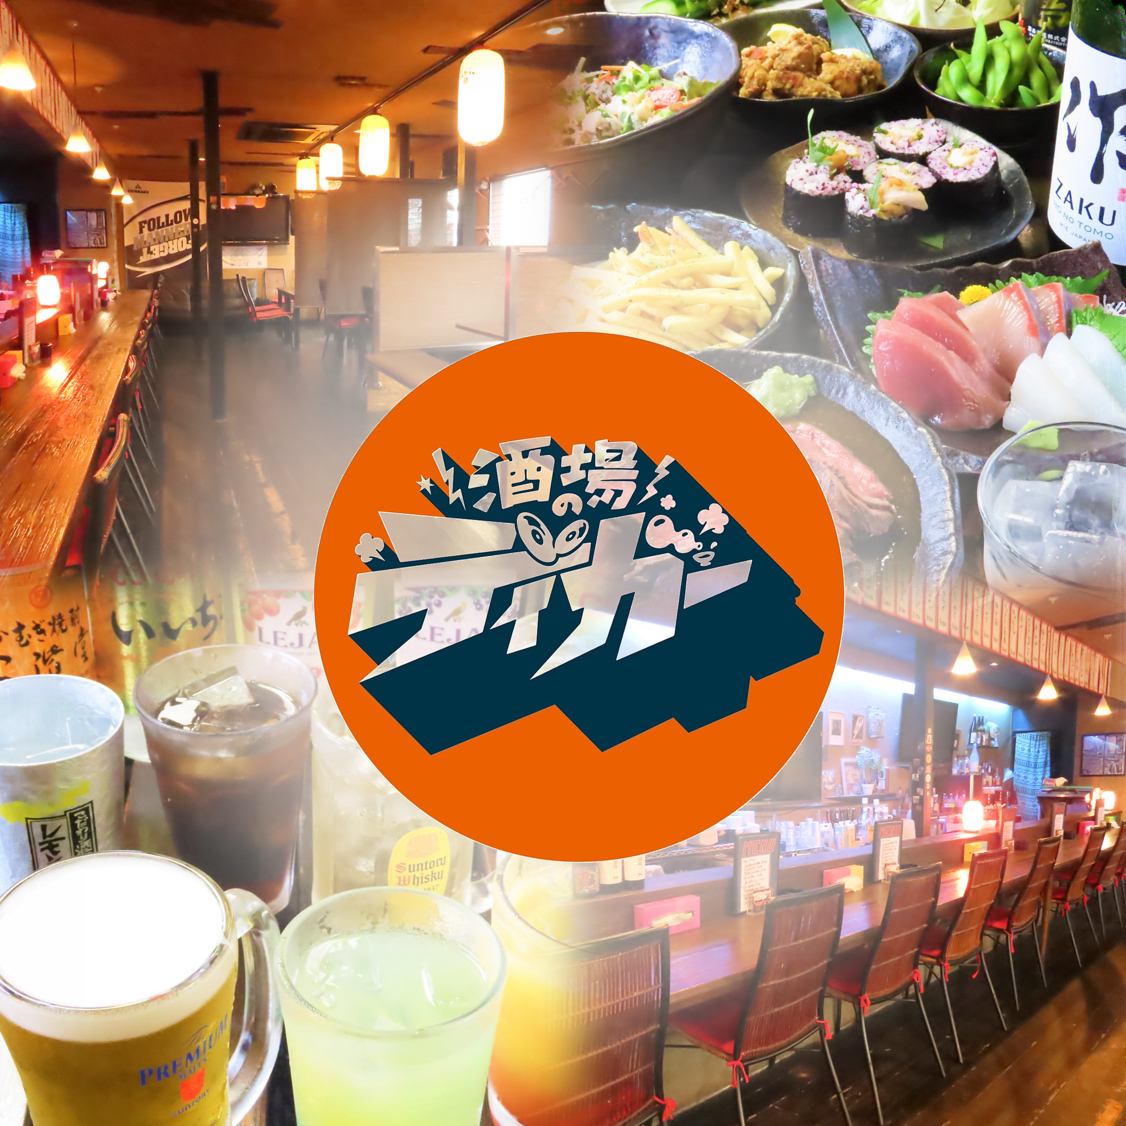 All-you-can-drink courses and single items are available ◎ You can enjoy it slowly.